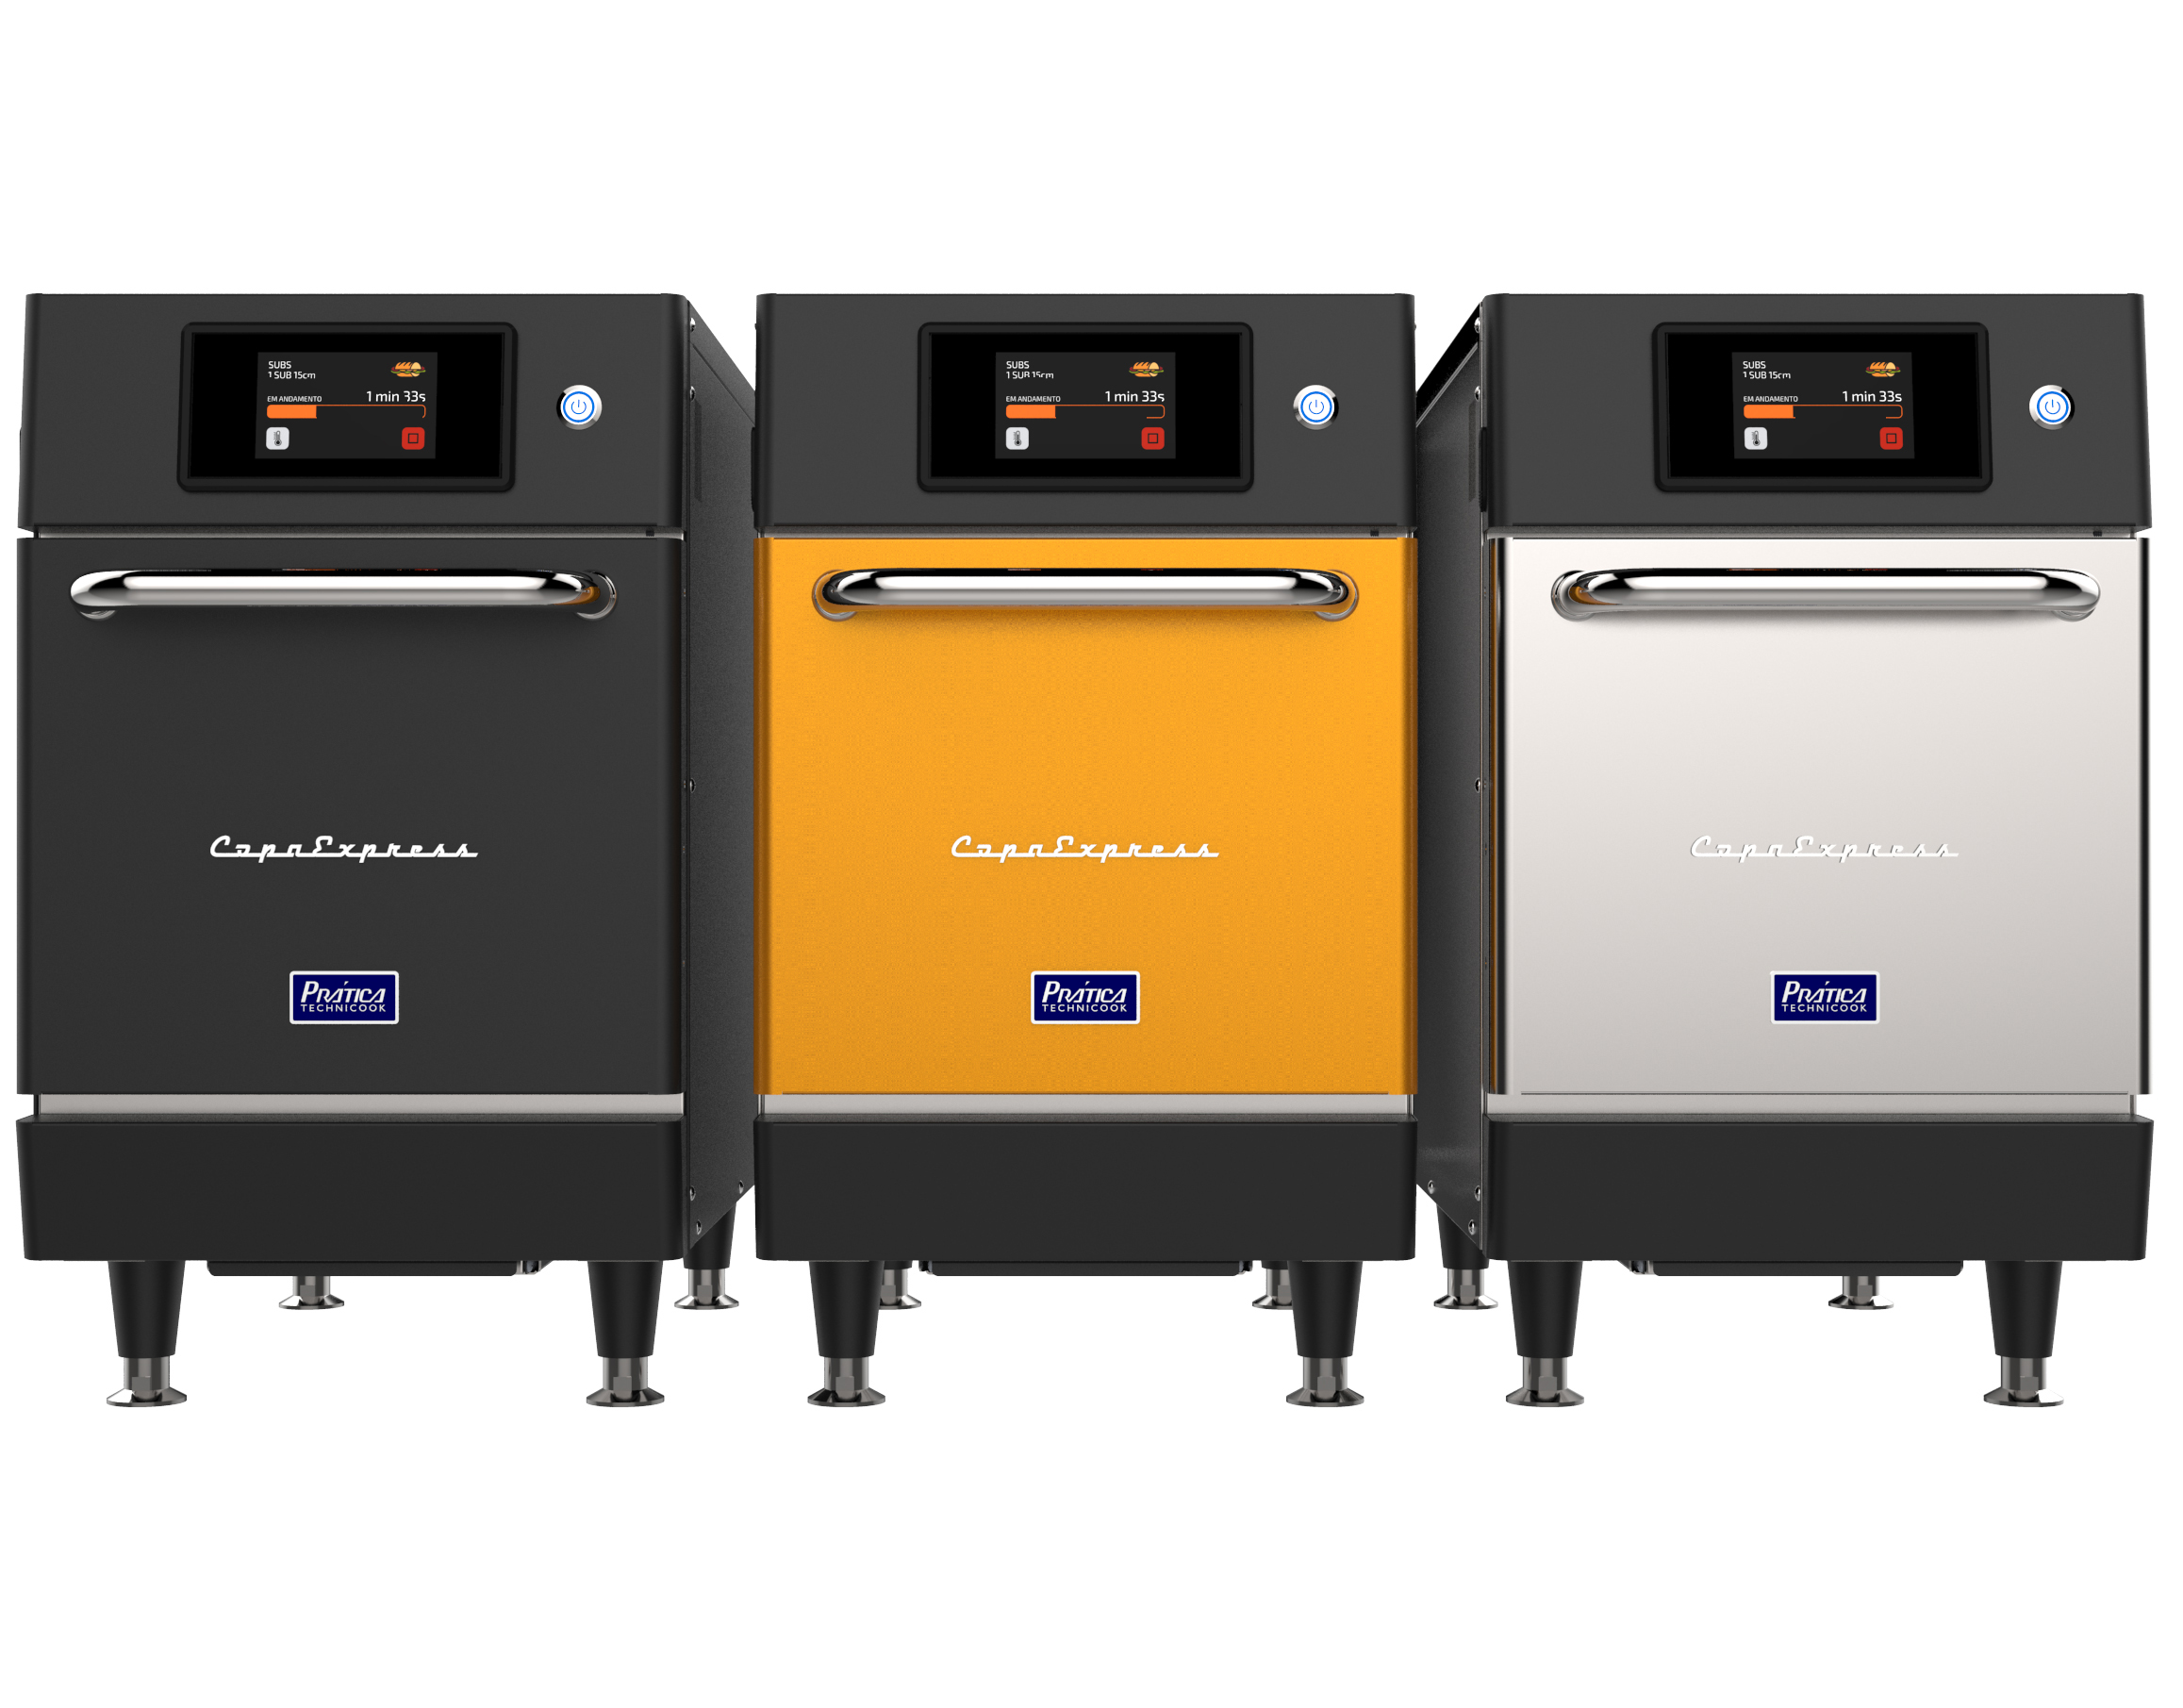 Pratica Copa Express Oven: super-fast compact with biggest oven in its class